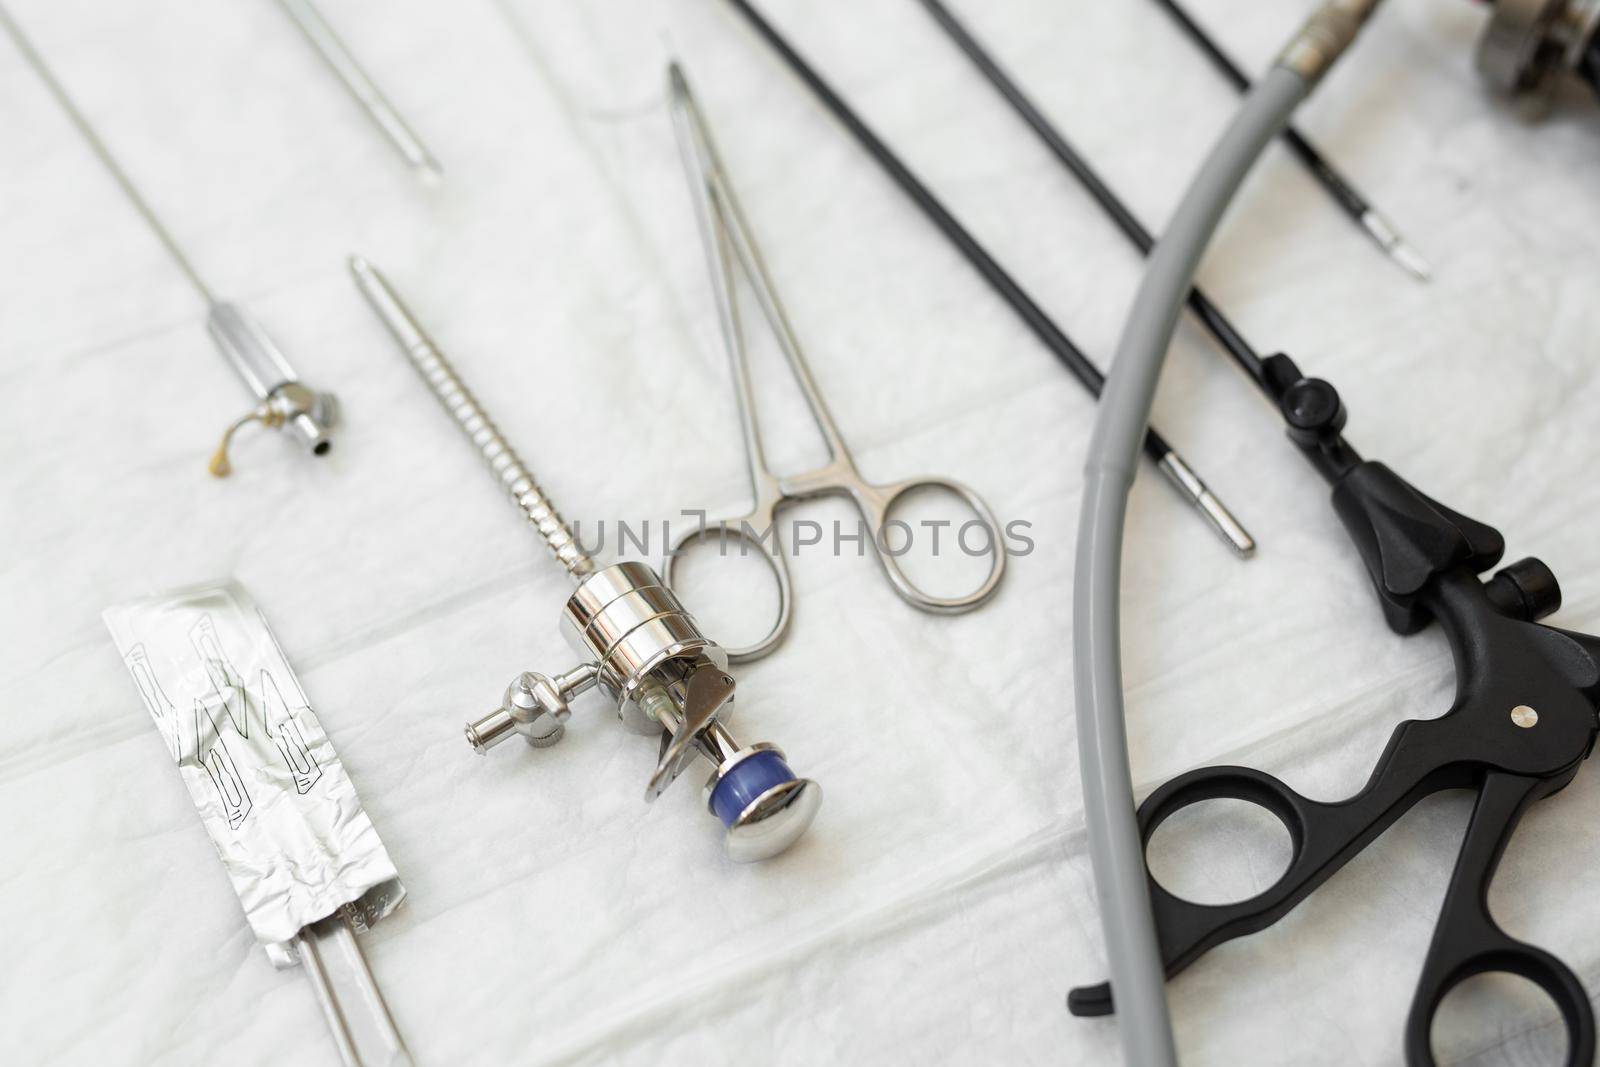 Laparoscopic instruments on the operating table in the surgical room